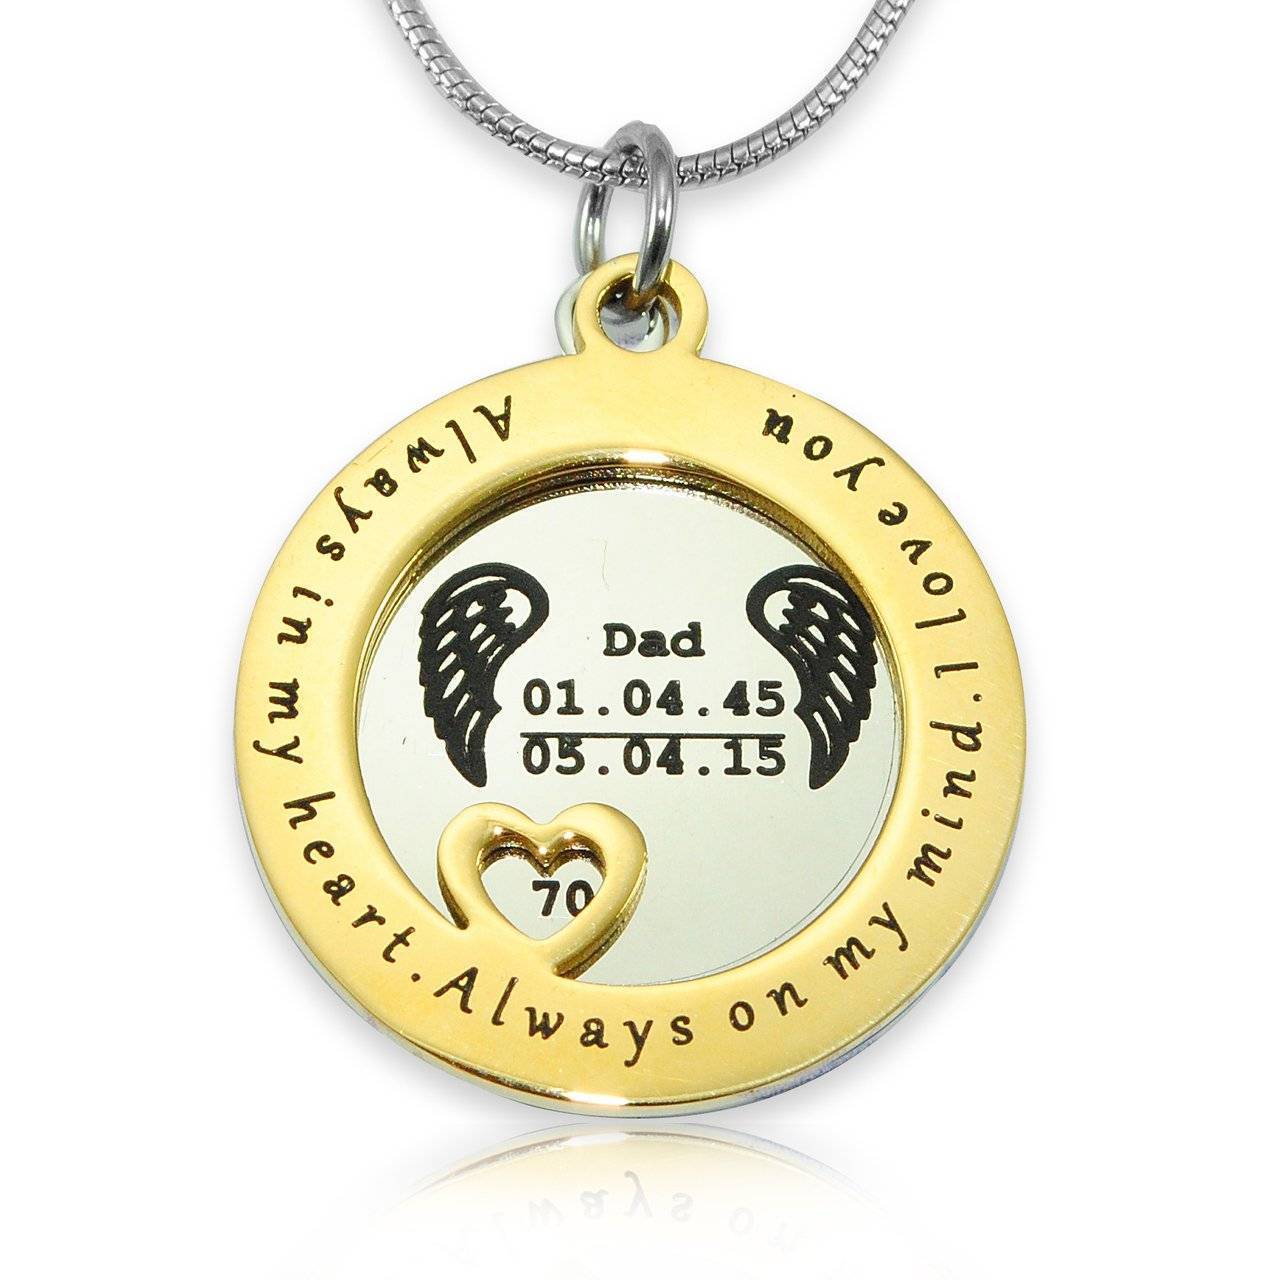 Always on My Mind Necklace - Memorial & Cremation Jewellery by Belle Fever